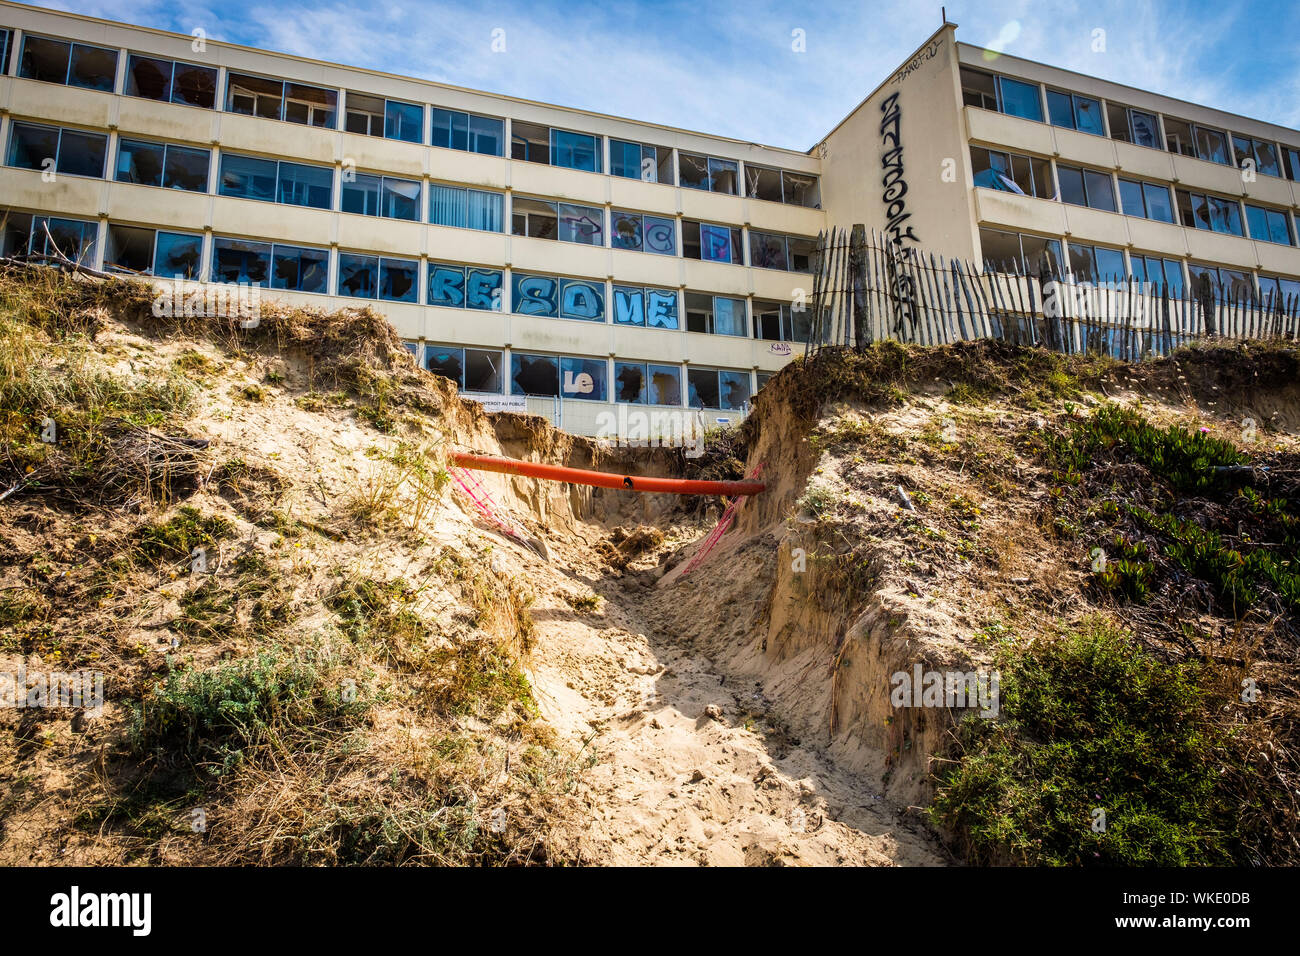 Soulac-sur-Mer (central-western France): the four-storey building “Le Signal”, whose owners were evacuated by a prefecture decree for climatic reasons Stock Photo